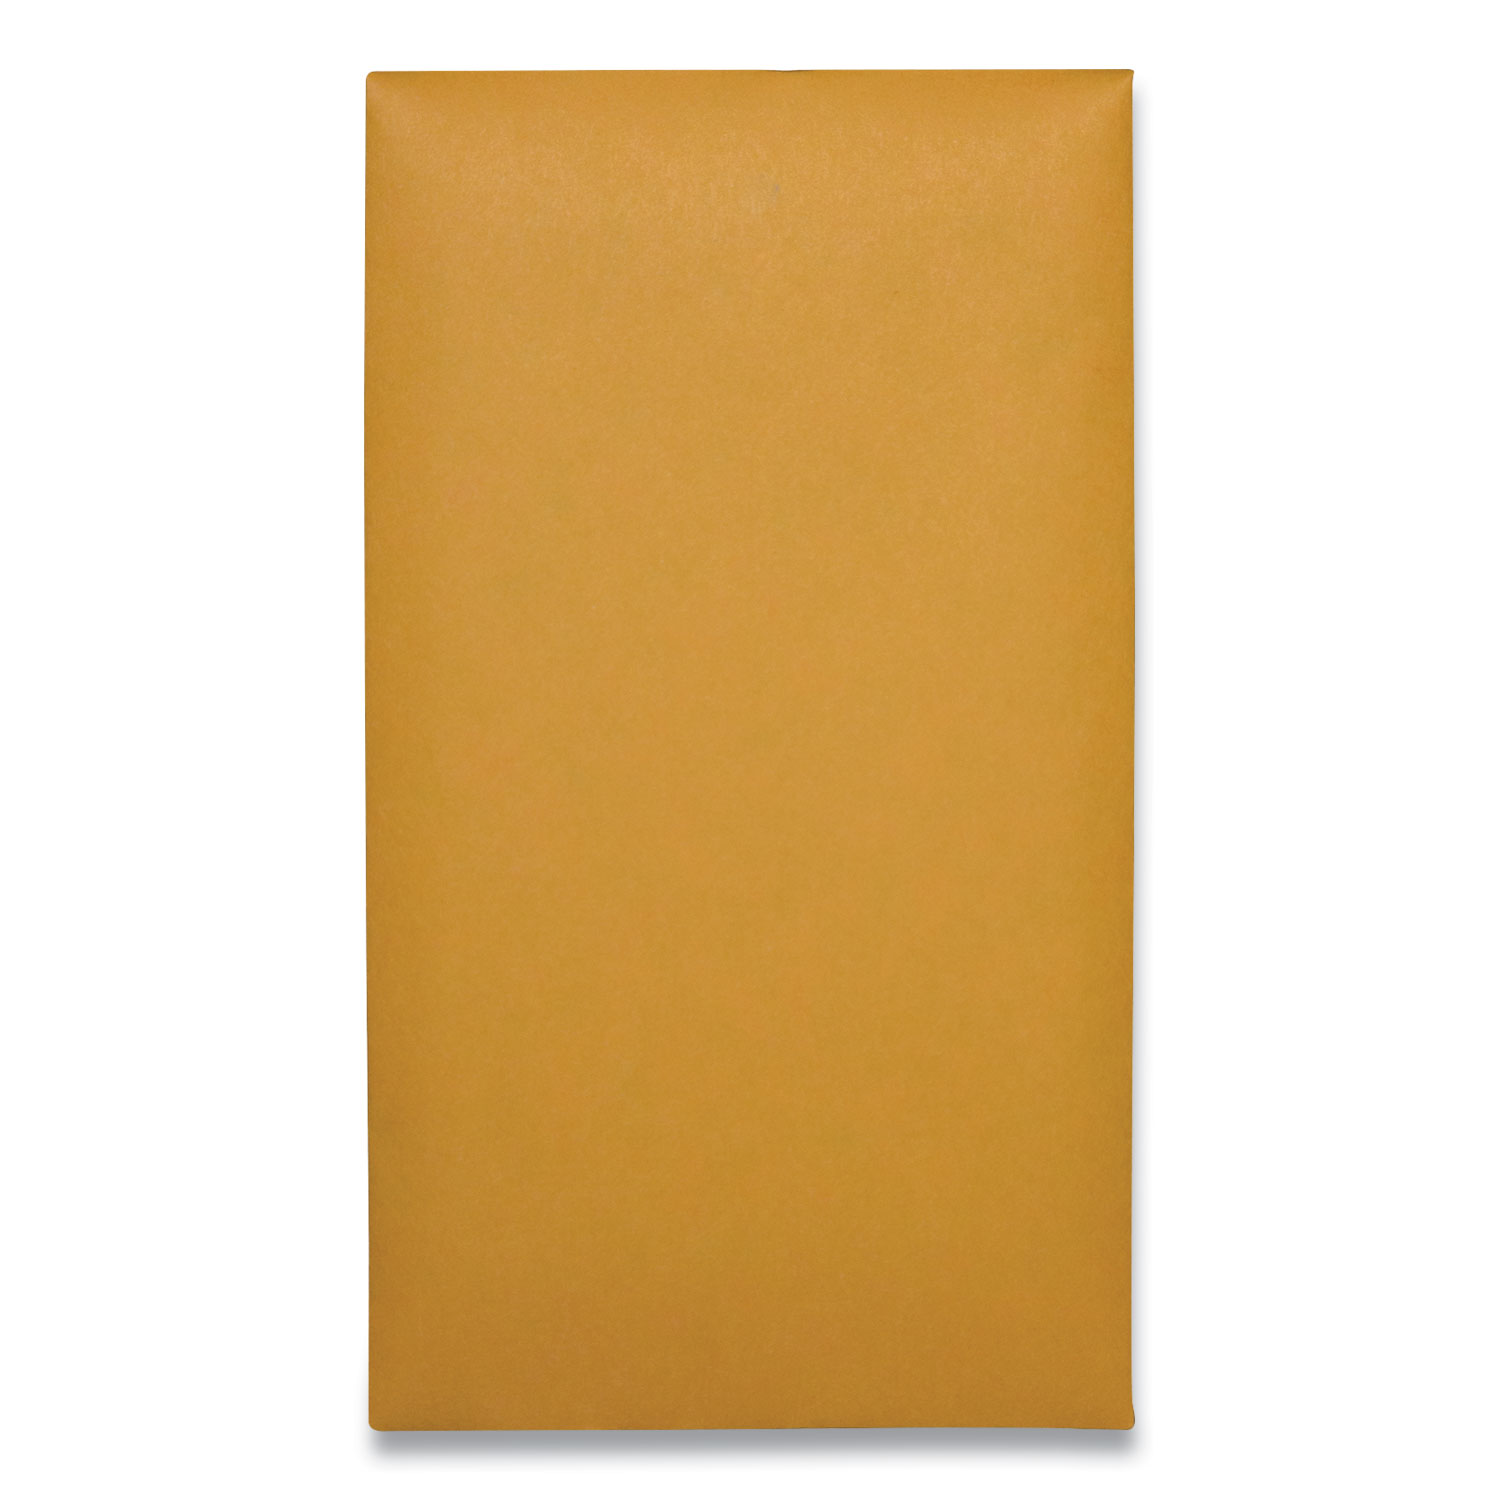 Kraft Coin and Small Parts Envelope, 20 lb Bond Weight Kraft, #5 1